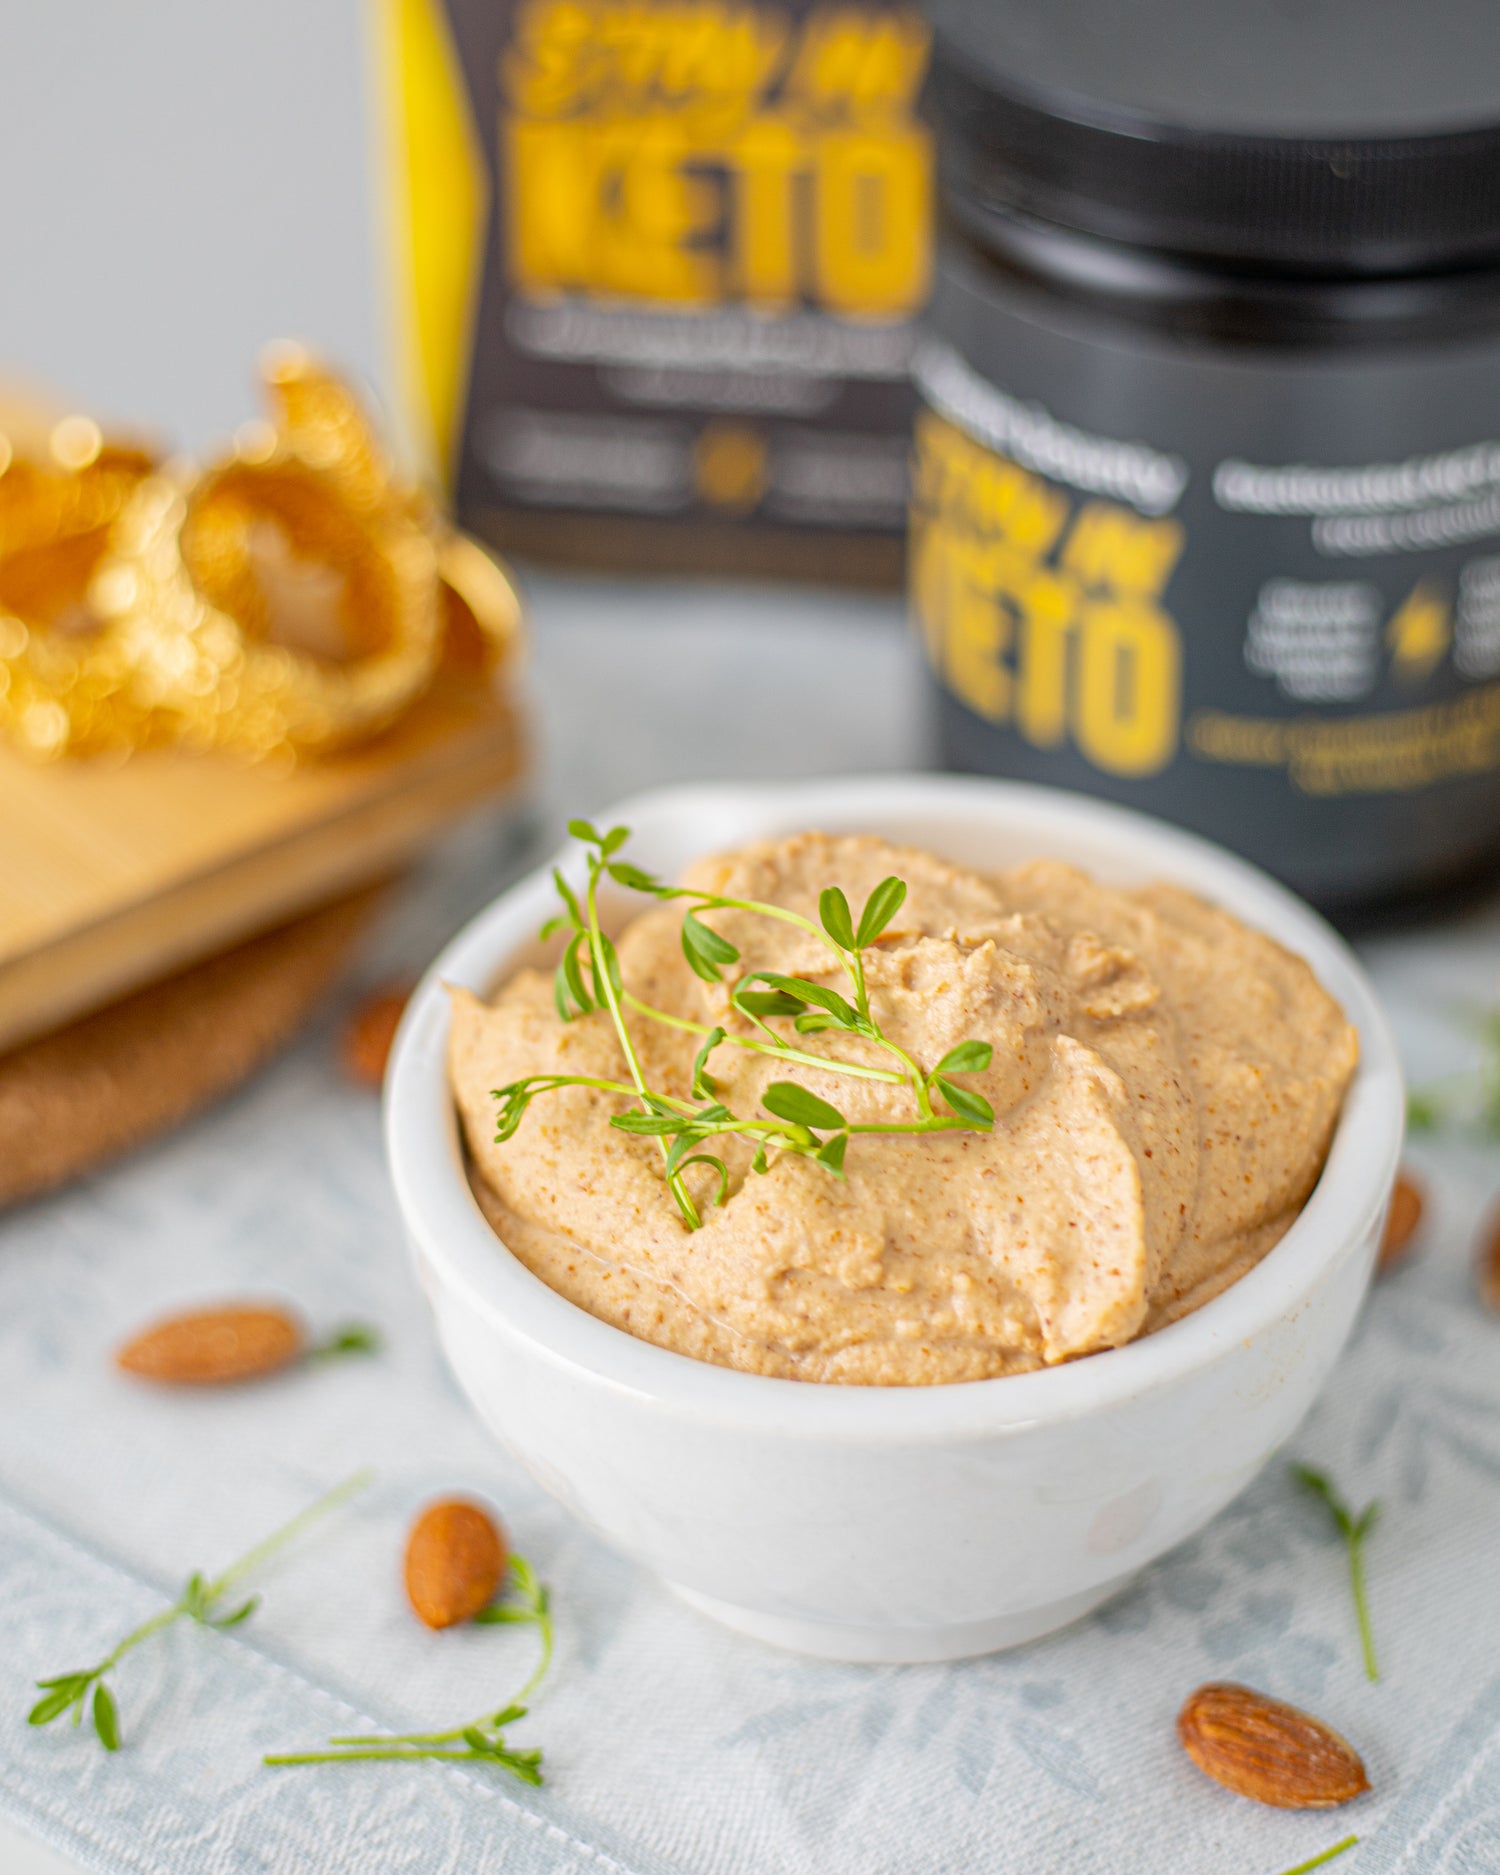 Spicy Thai Almond Spread made with Stay In Keto from Vitamin Bounty